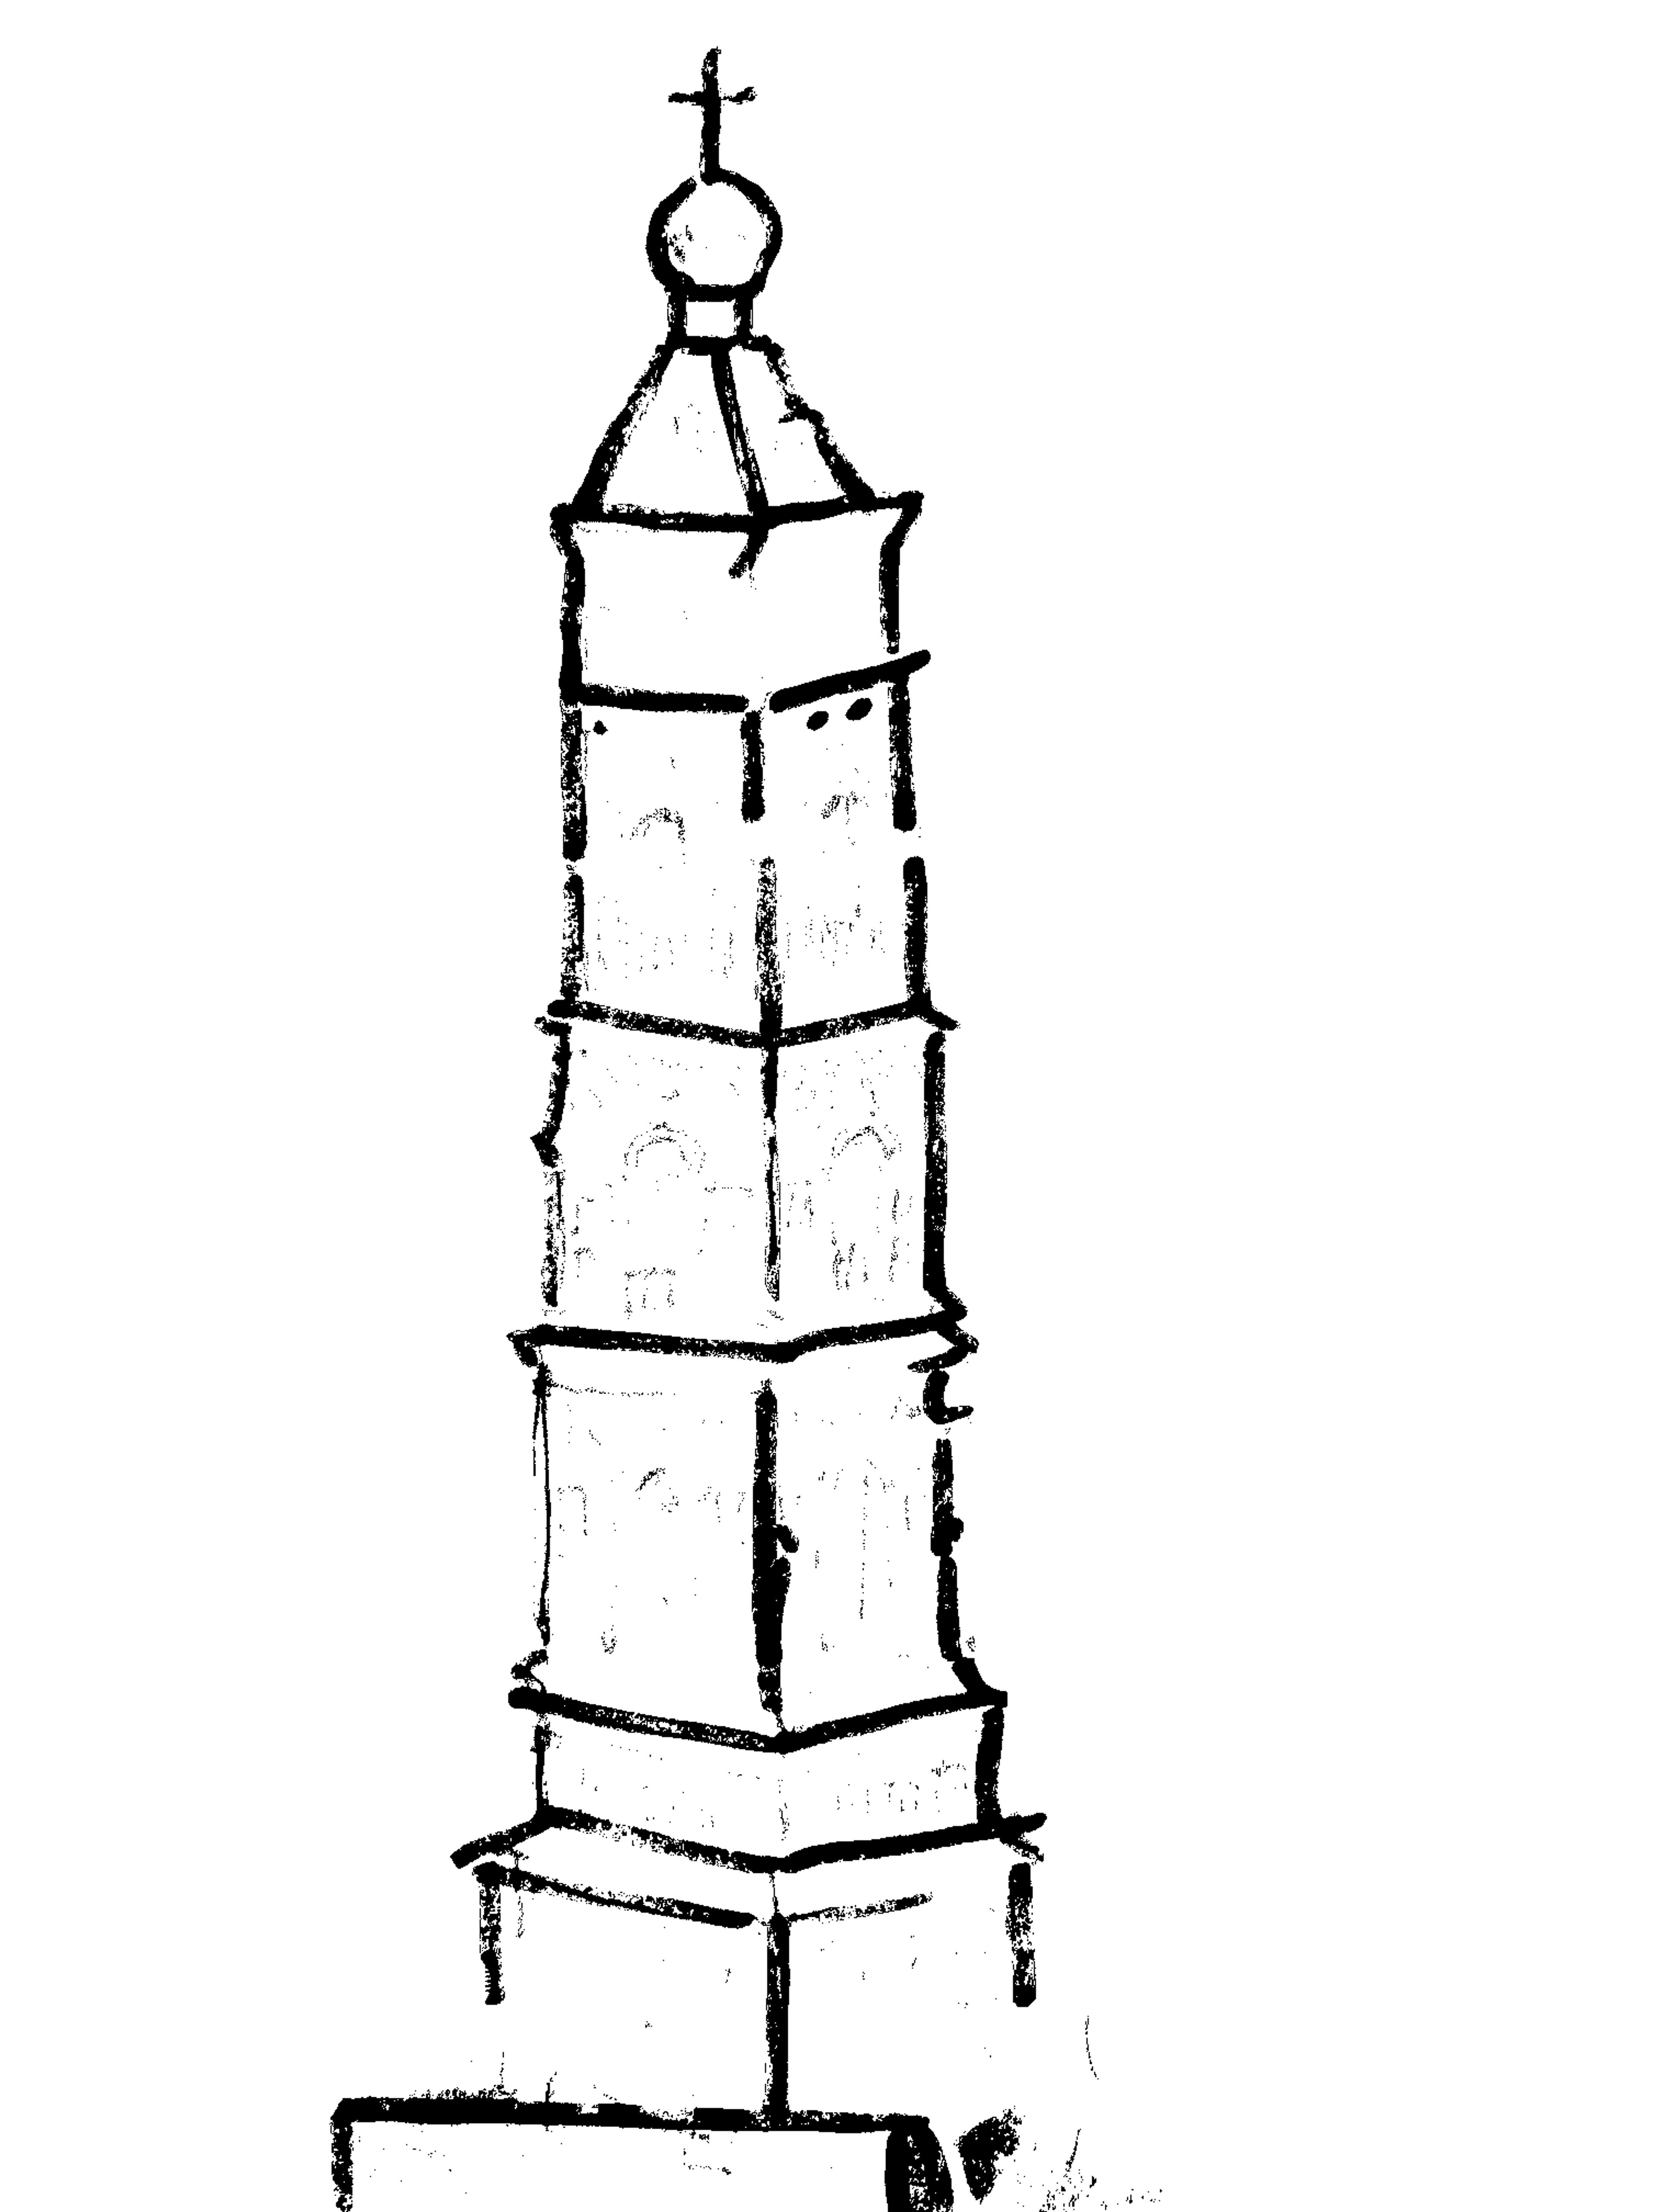 A line drawing of a church tower.